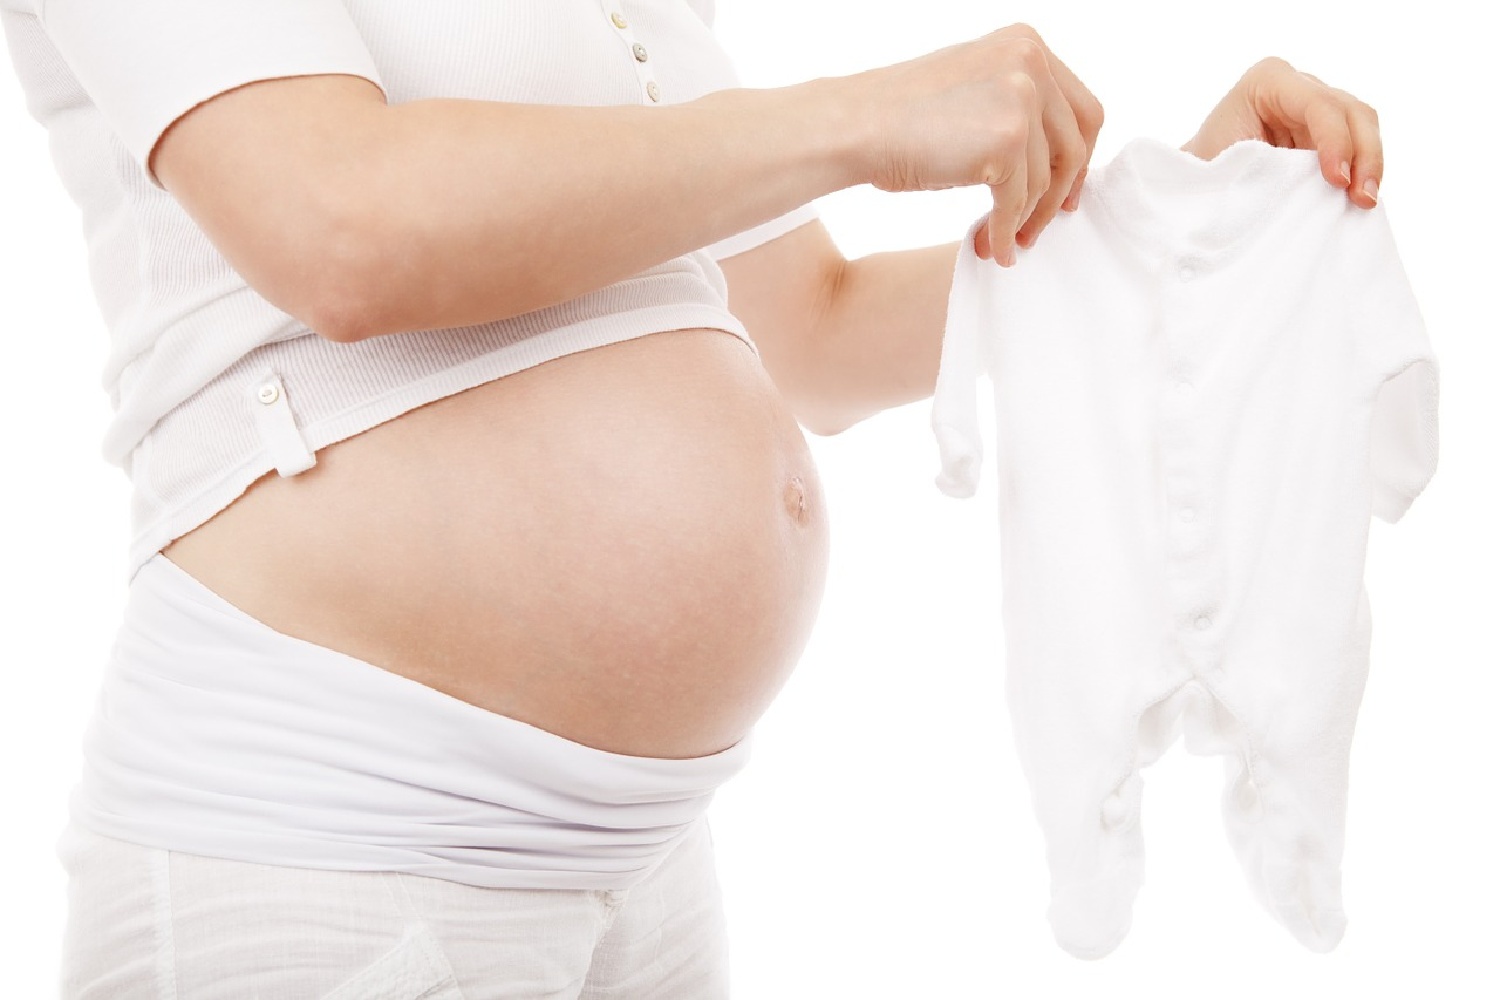 some of the most cvommon health problems during pregnancy you might face